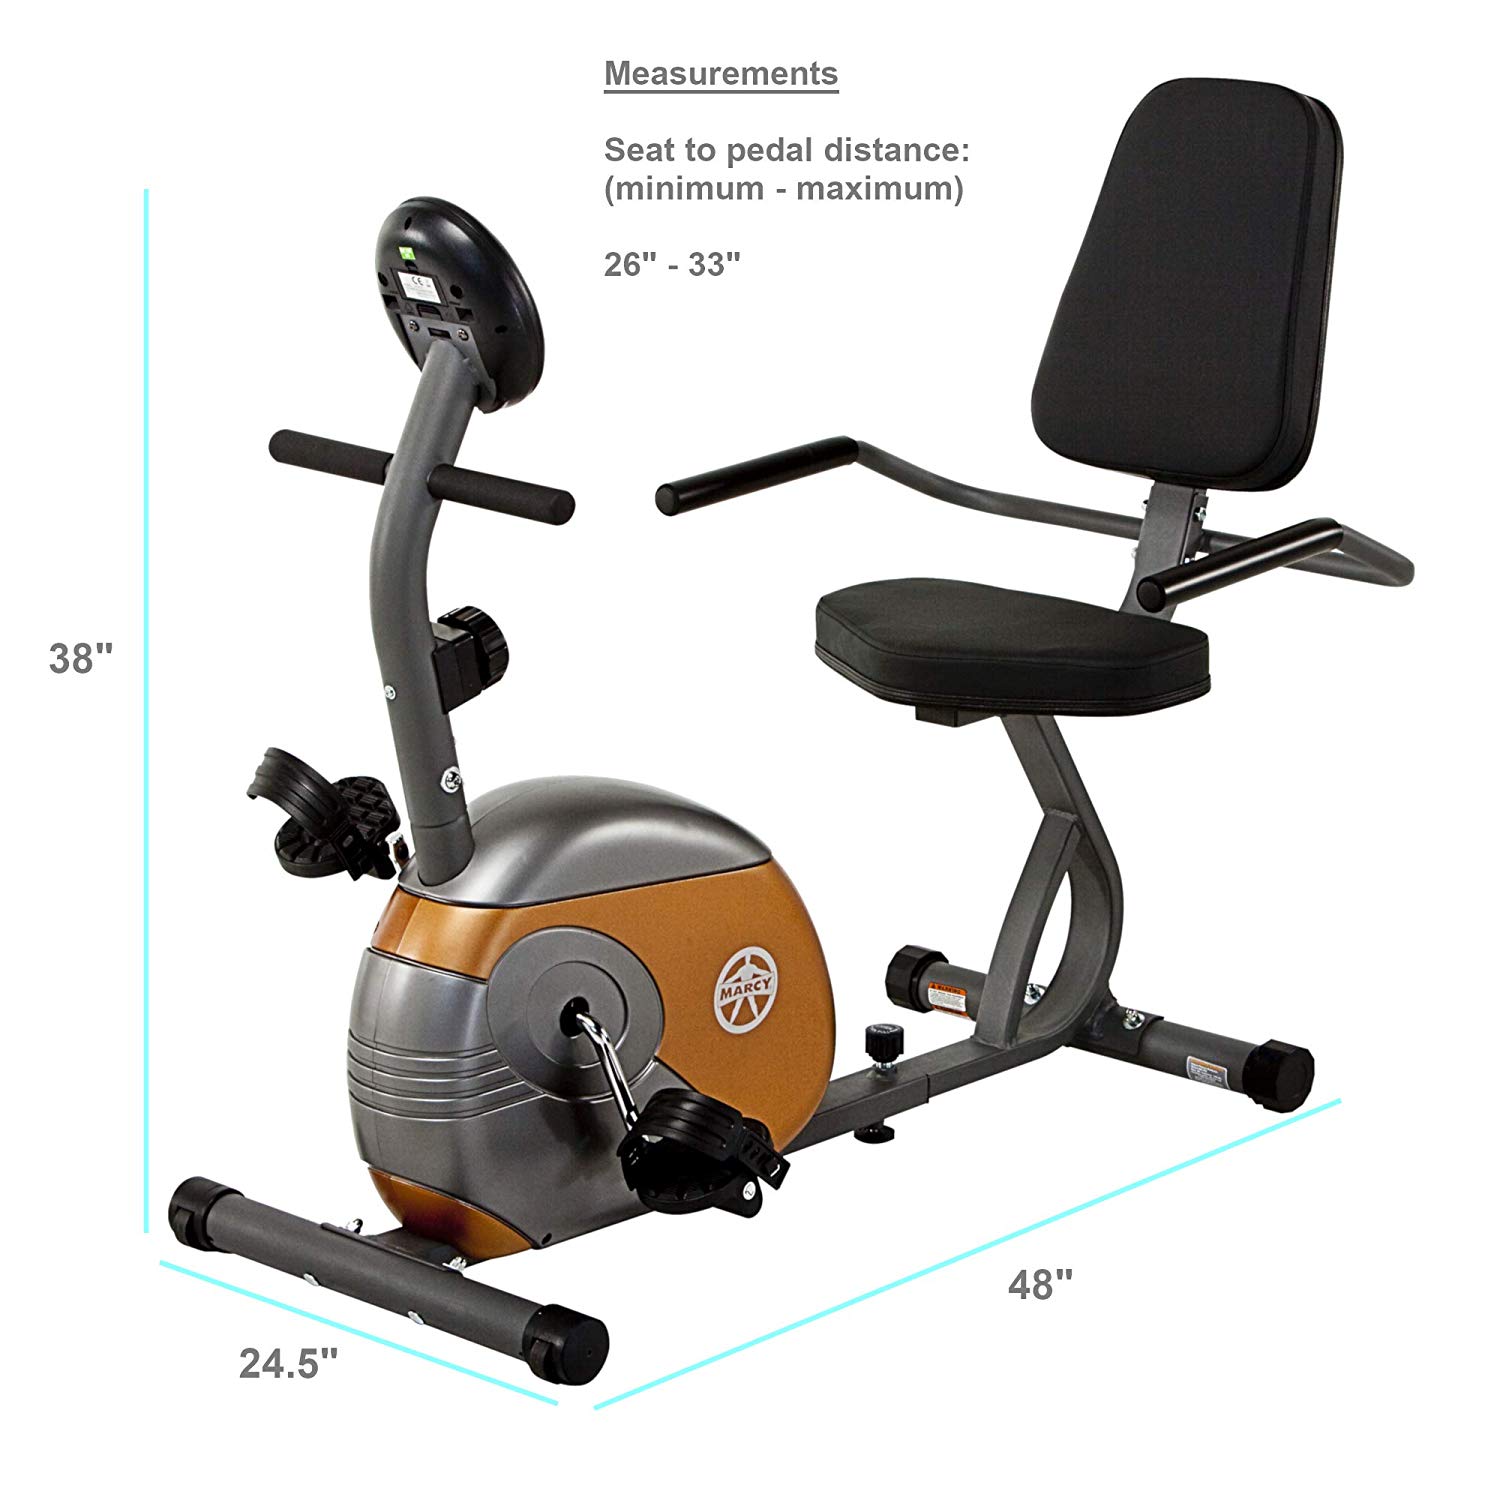 Marcy ME709 Recumbent Magnetic Exercise Bike Cycling Home Gym Equipment - image 5 of 5